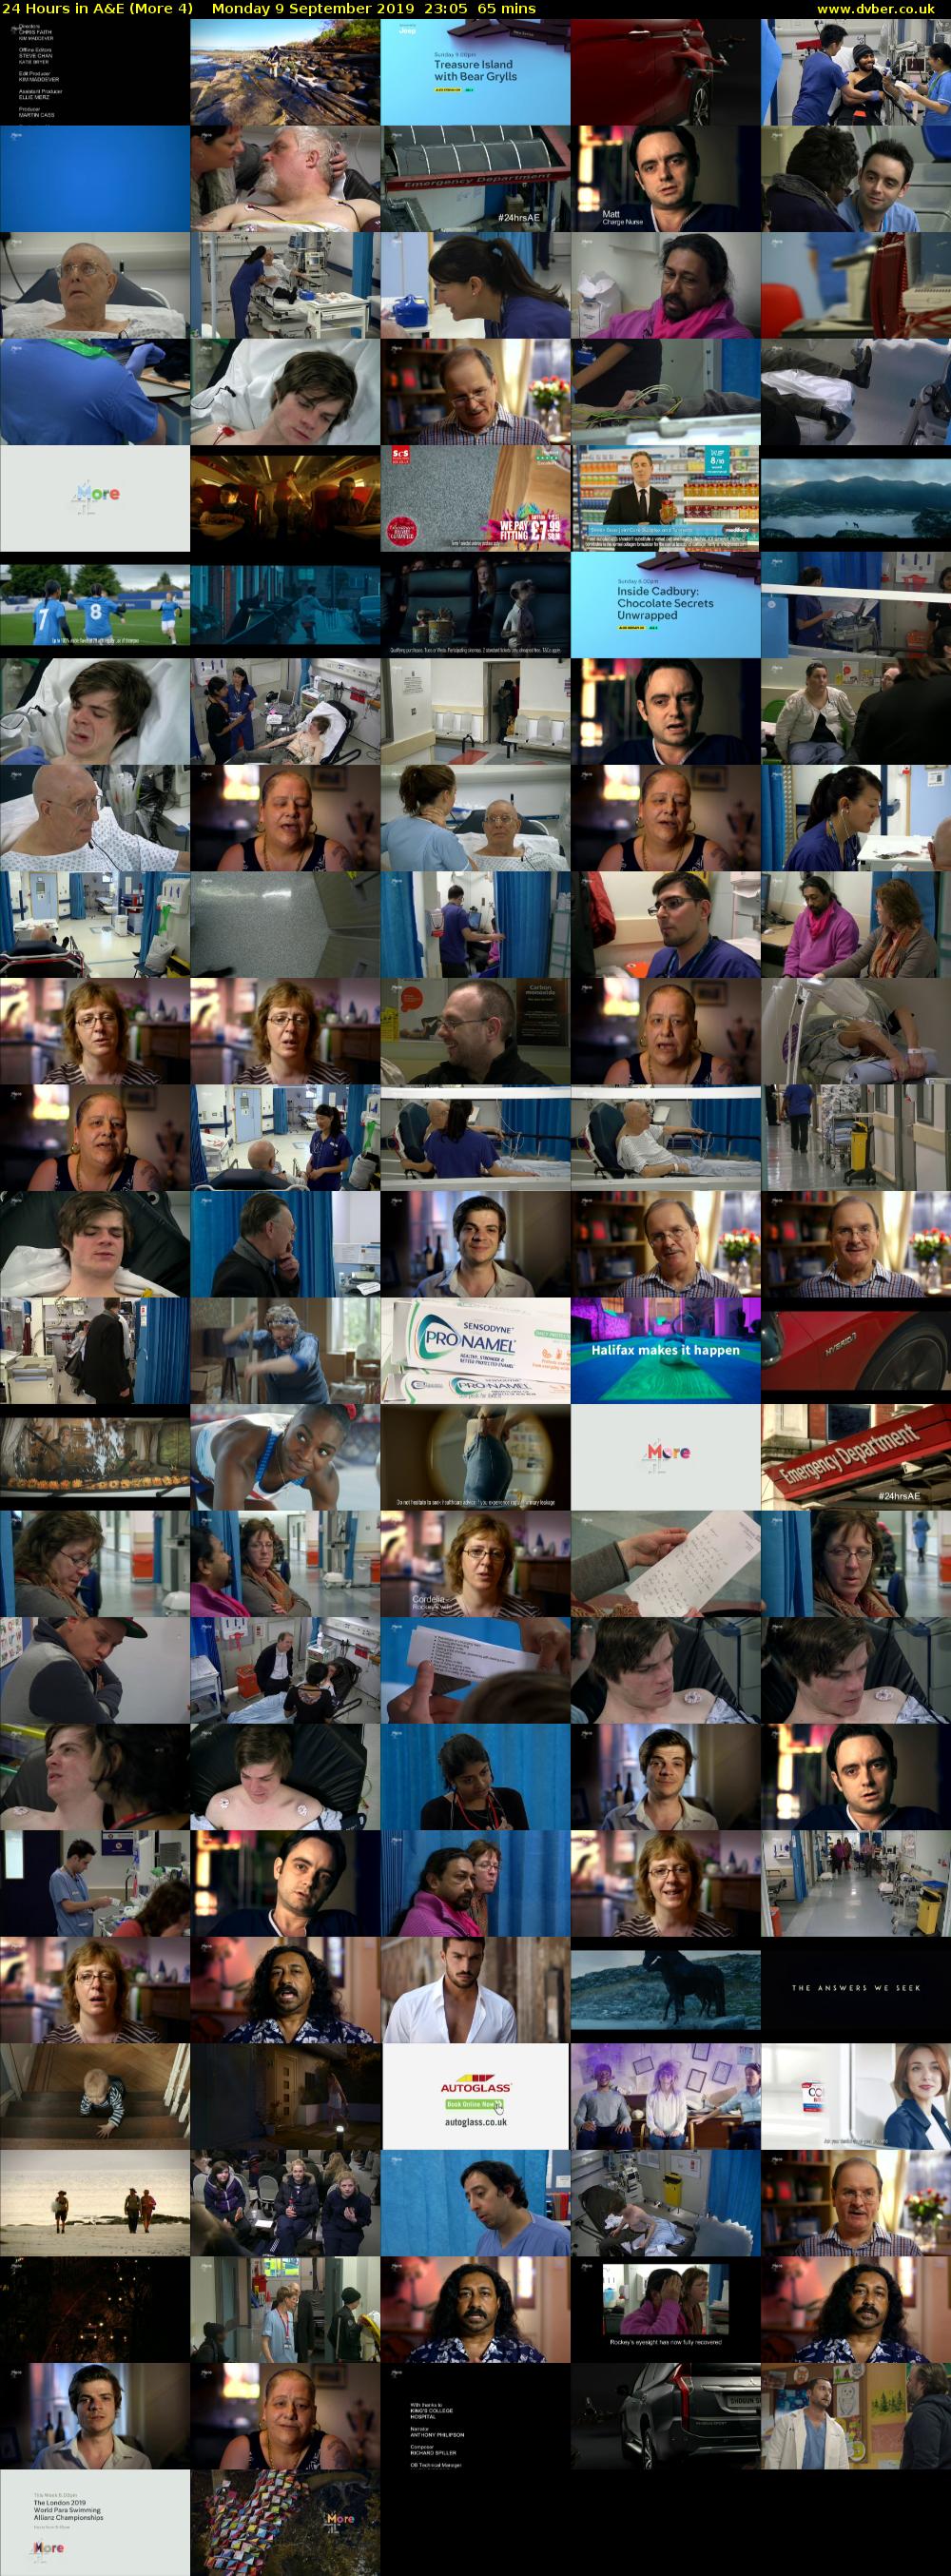 24 Hours in A&E (More 4) Monday 9 September 2019 23:05 - 00:10